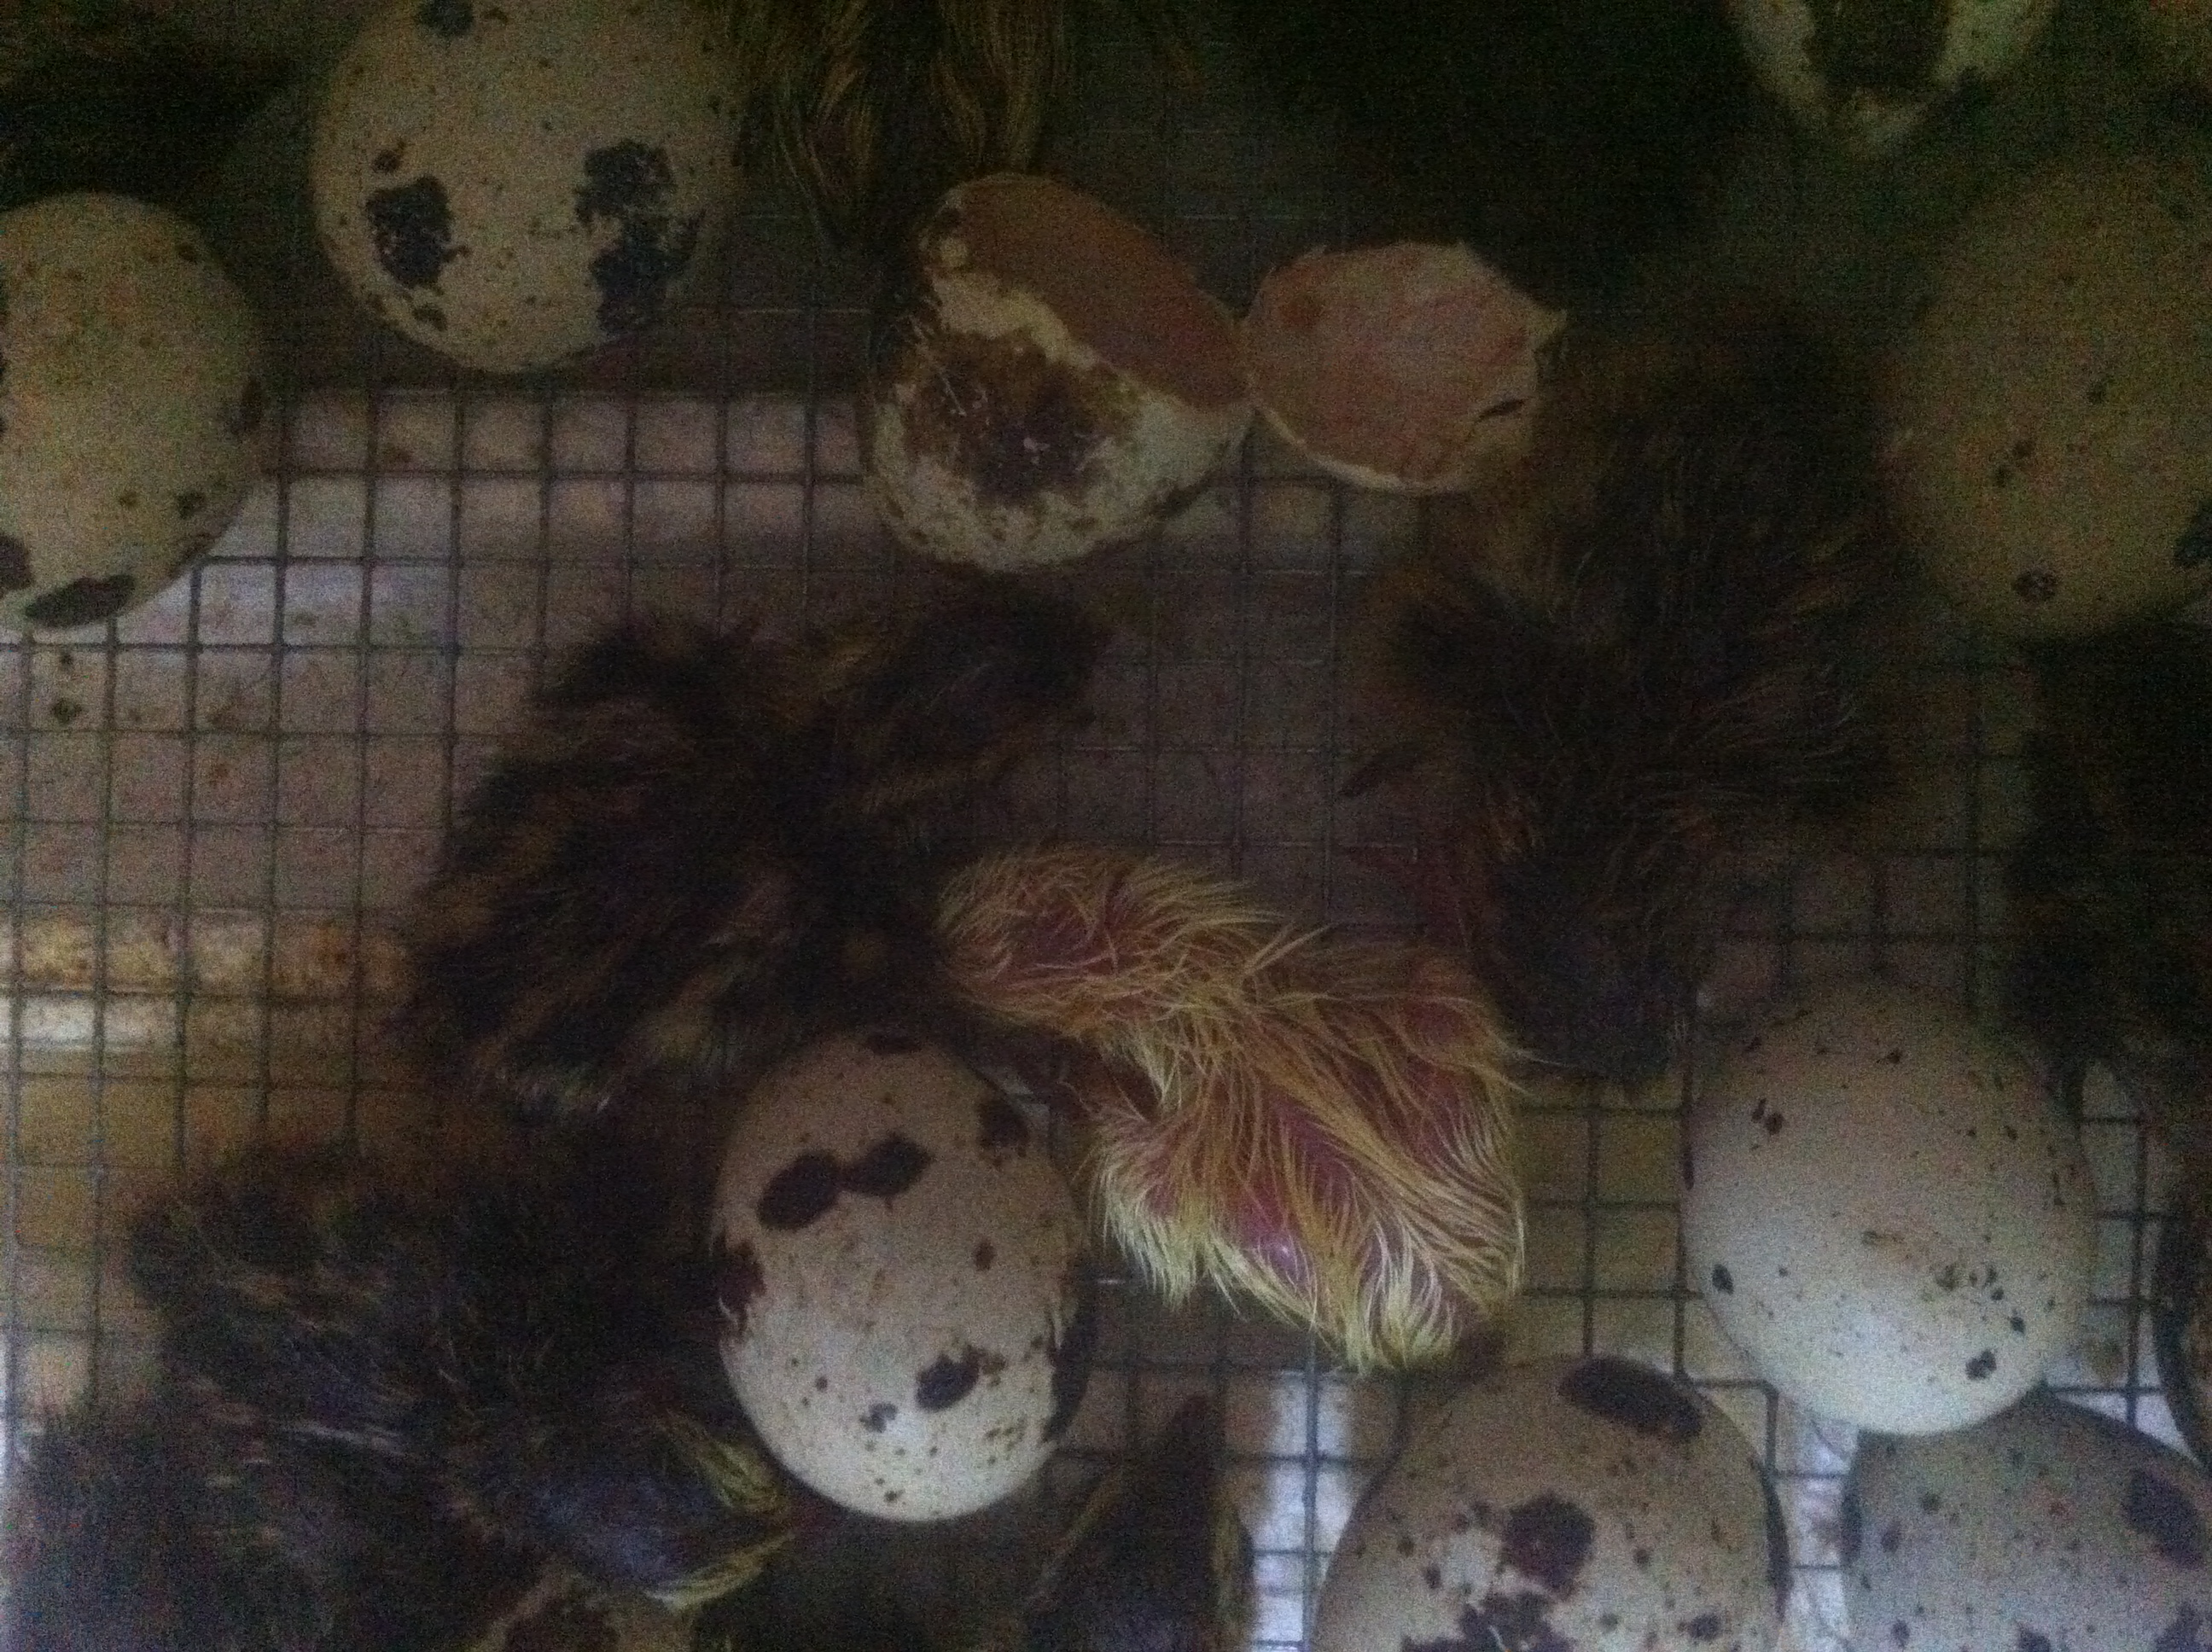 So far 17 quail have hatched. With only one yellow chick.